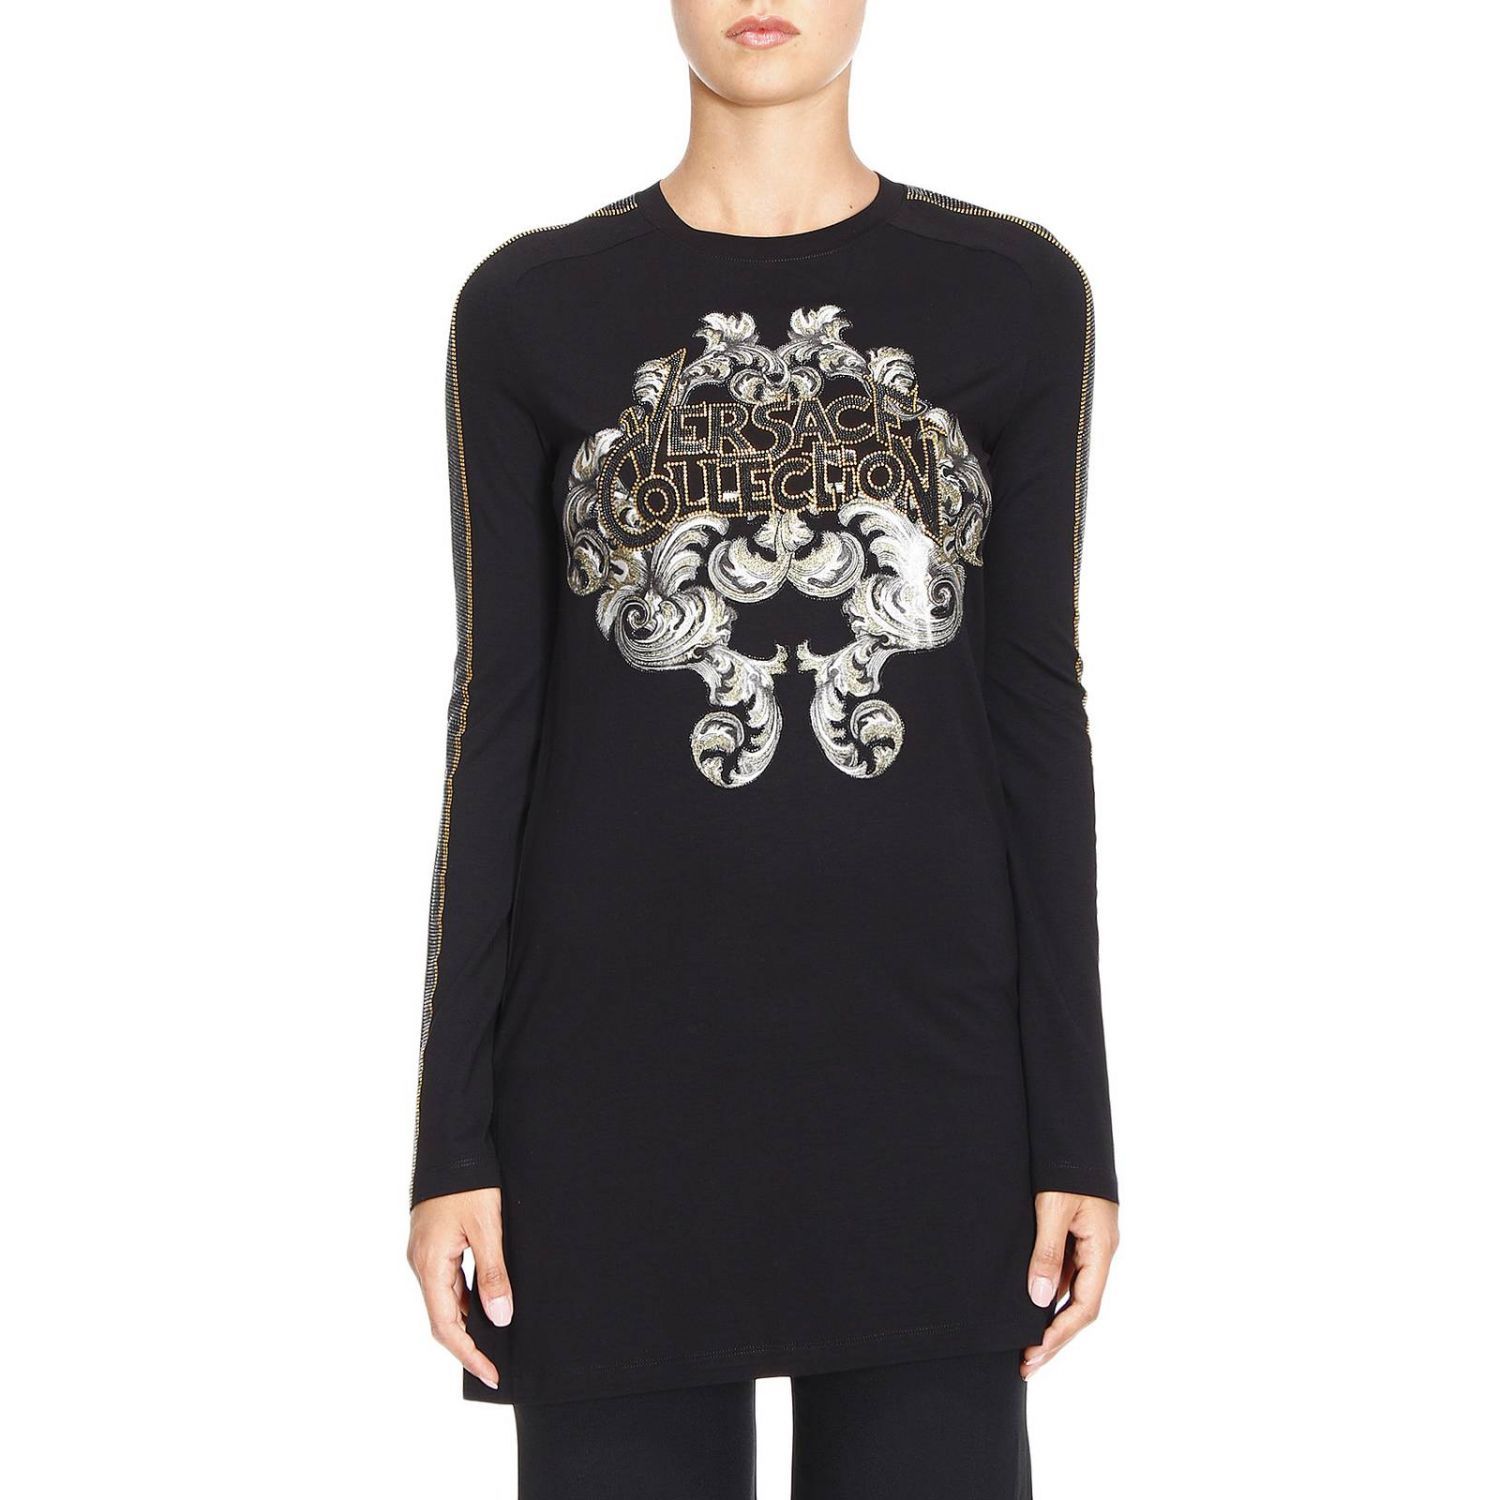 Versace Collection - Sweater T-shirt Women Versace Collection - black ...